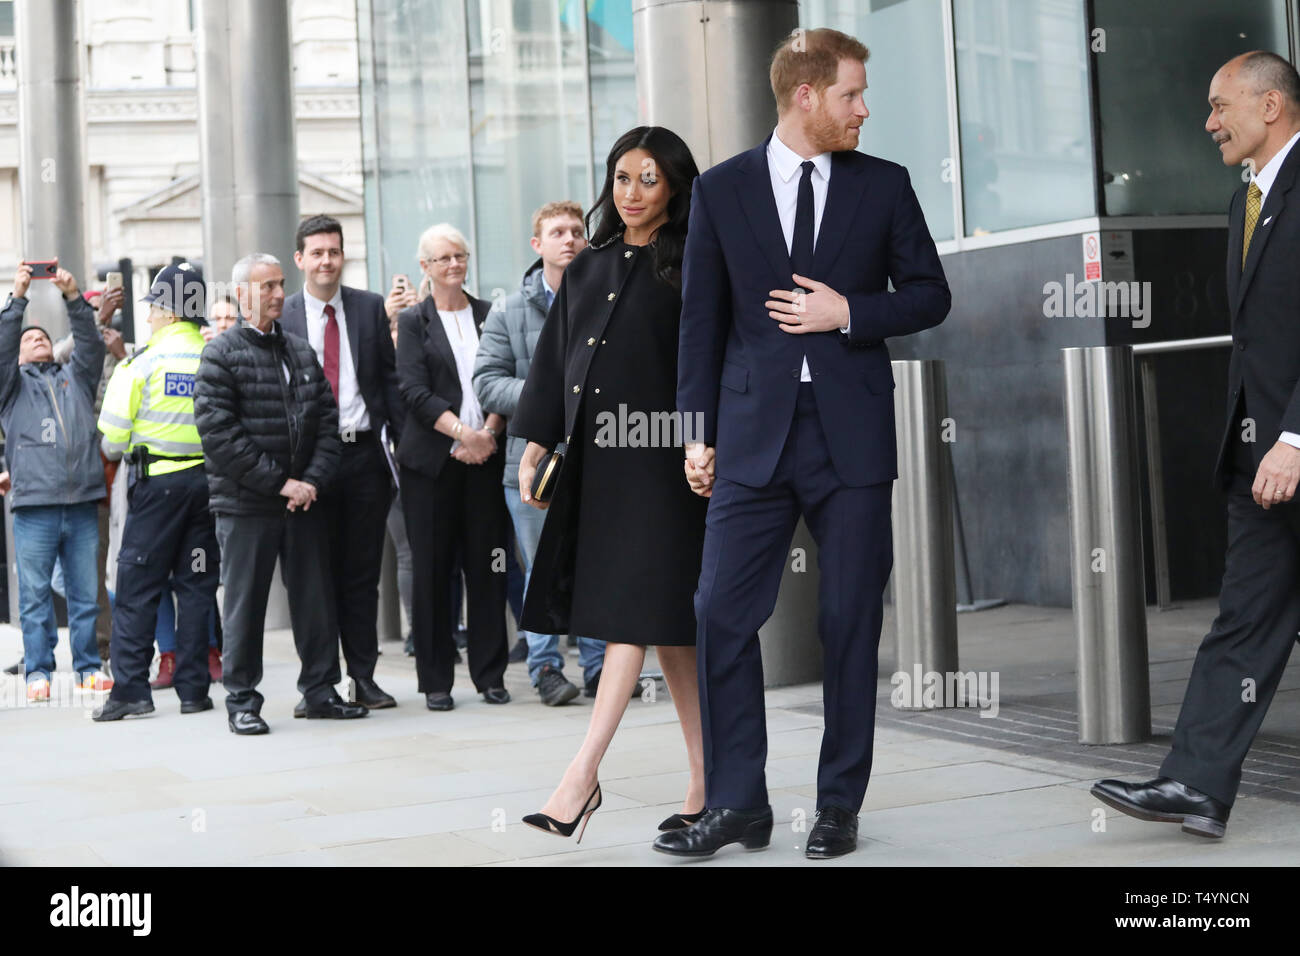 Duke and Duchess of Sussex visit Newzealand House - Arrivals  Featuring: Duchess of Sussex, Duke of Sussex, Meghan Markle, Prince Harry Where: London, United Kingdom When: 19 Mar 2019 Credit: Lia Toby/WENN.com Stock Photo